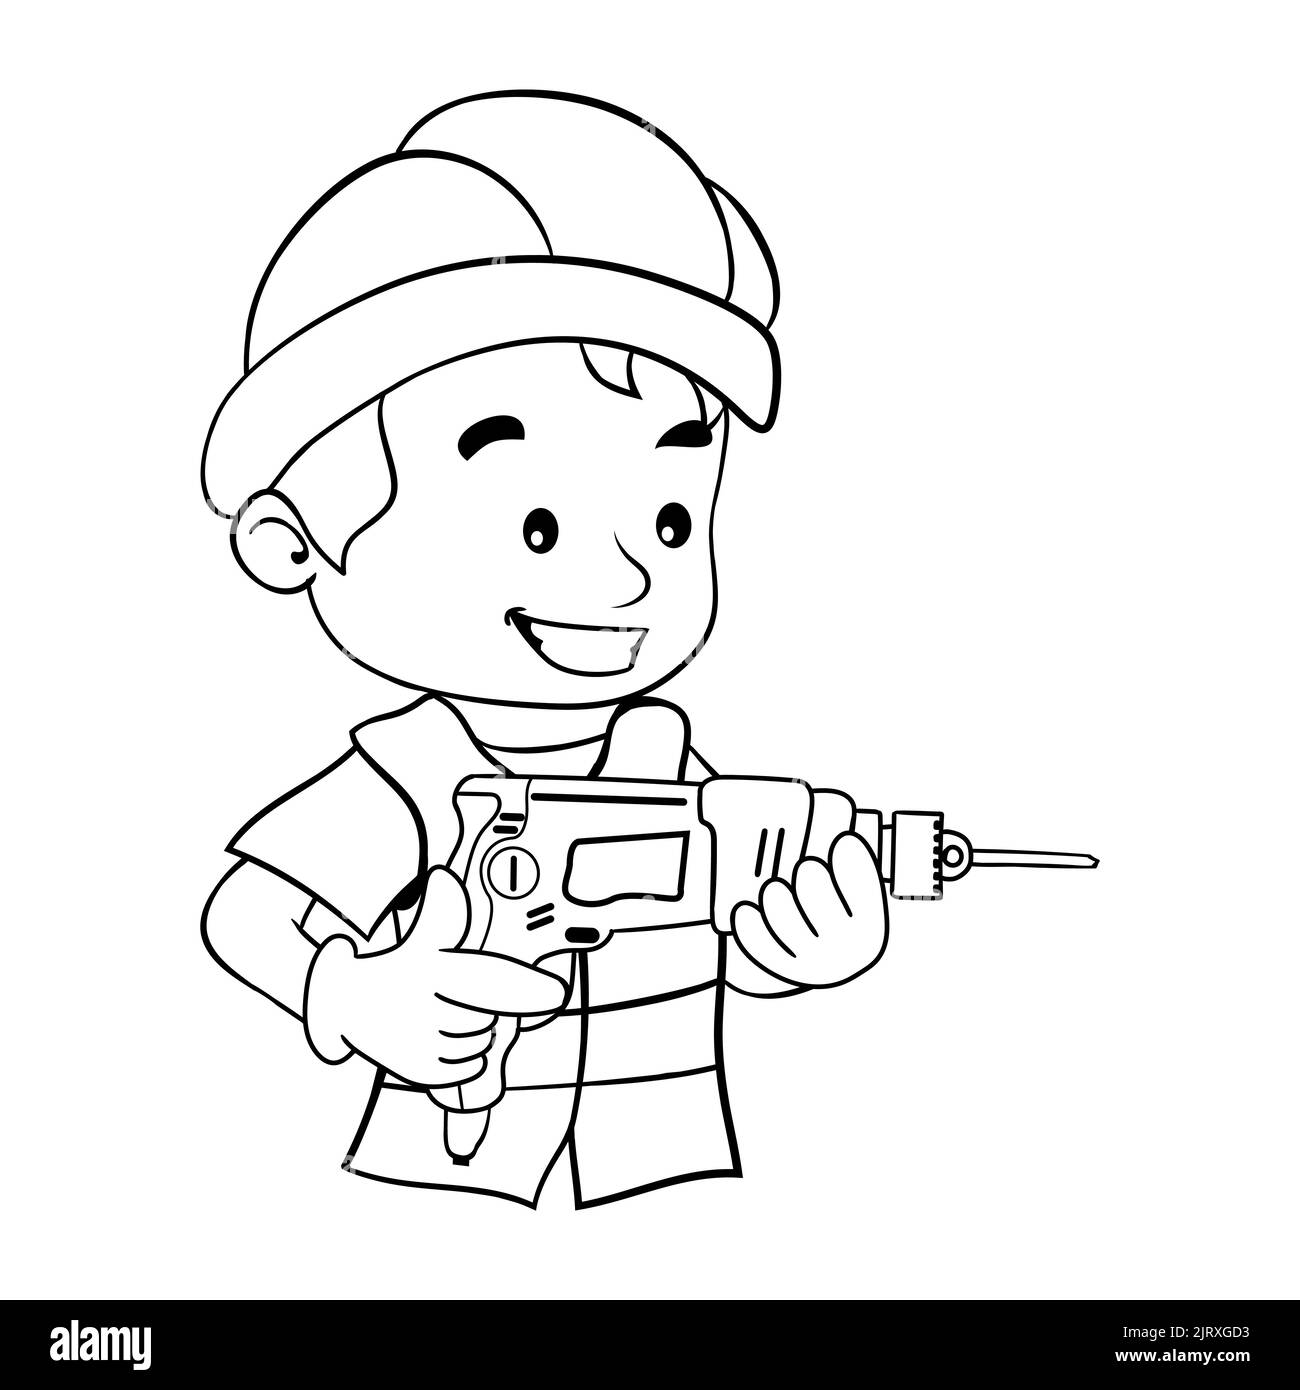 Cartoon design of labor worker with his safety helmet operating a drill. Industrial construction worker or carpentry. Coloring page Stock Vector